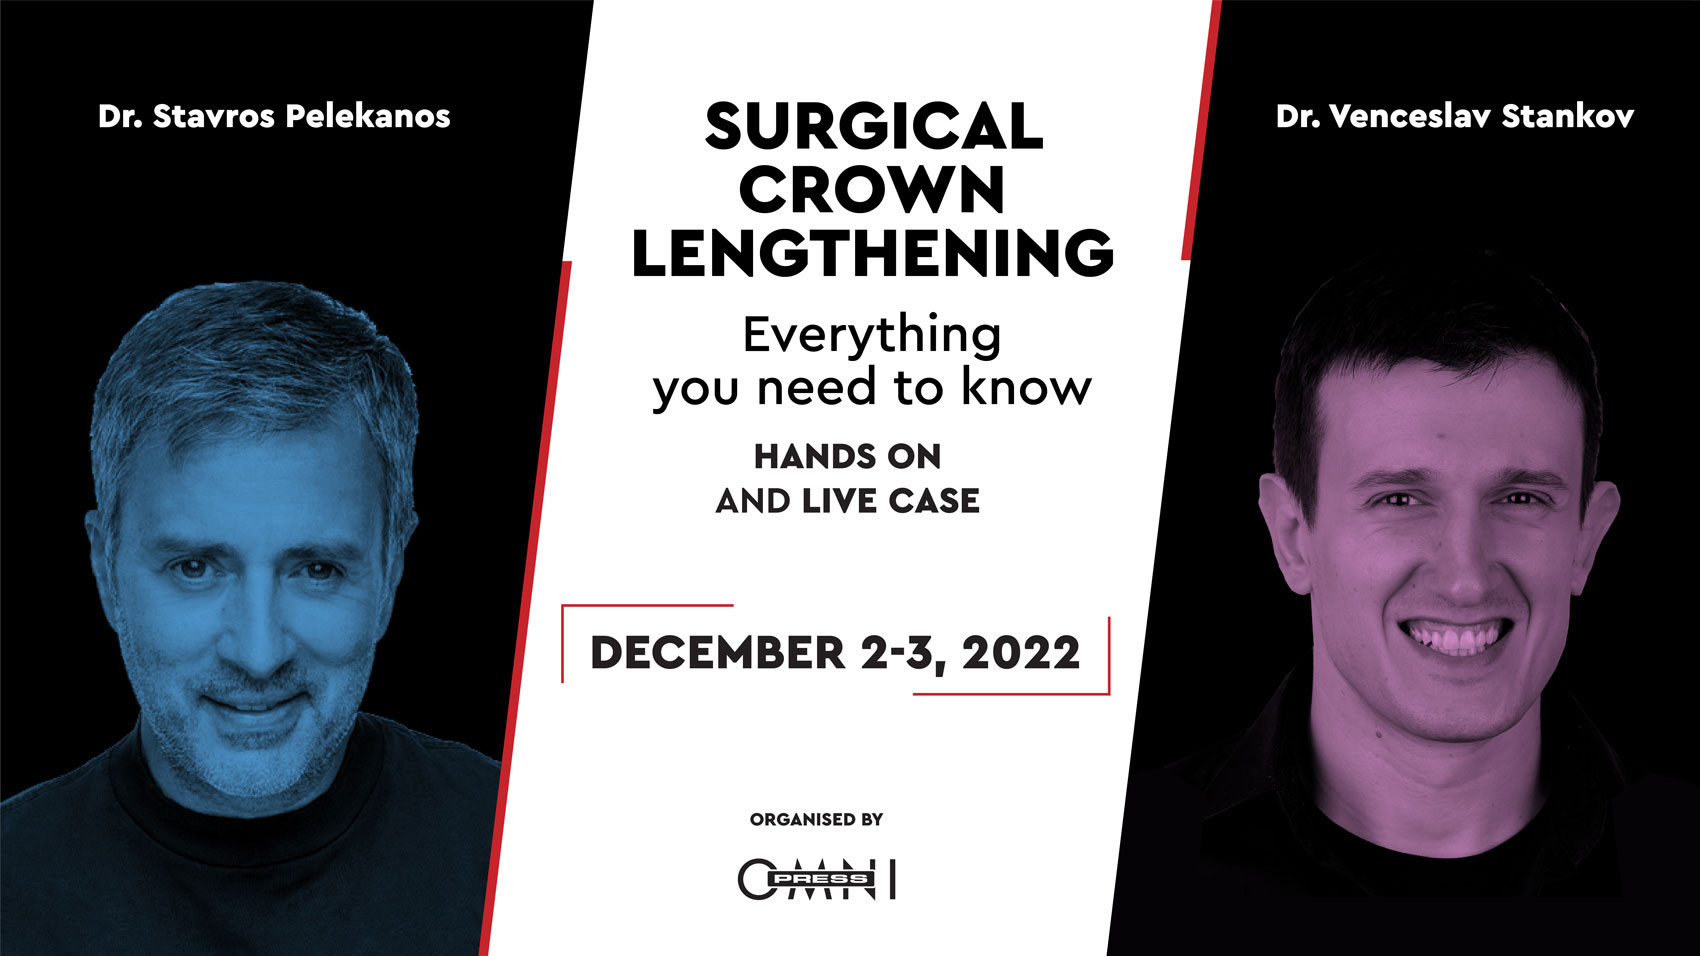 Surgical Crown lengthening - everything you need to know